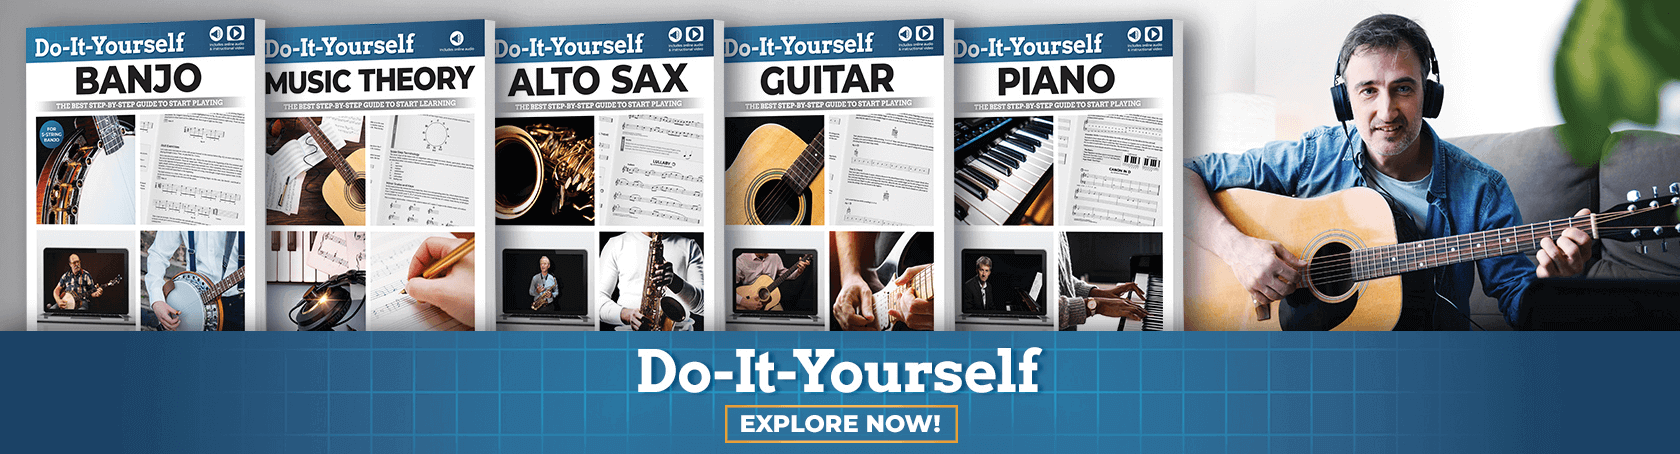 The Do-It-Yourself Series - Method books for all musicians.